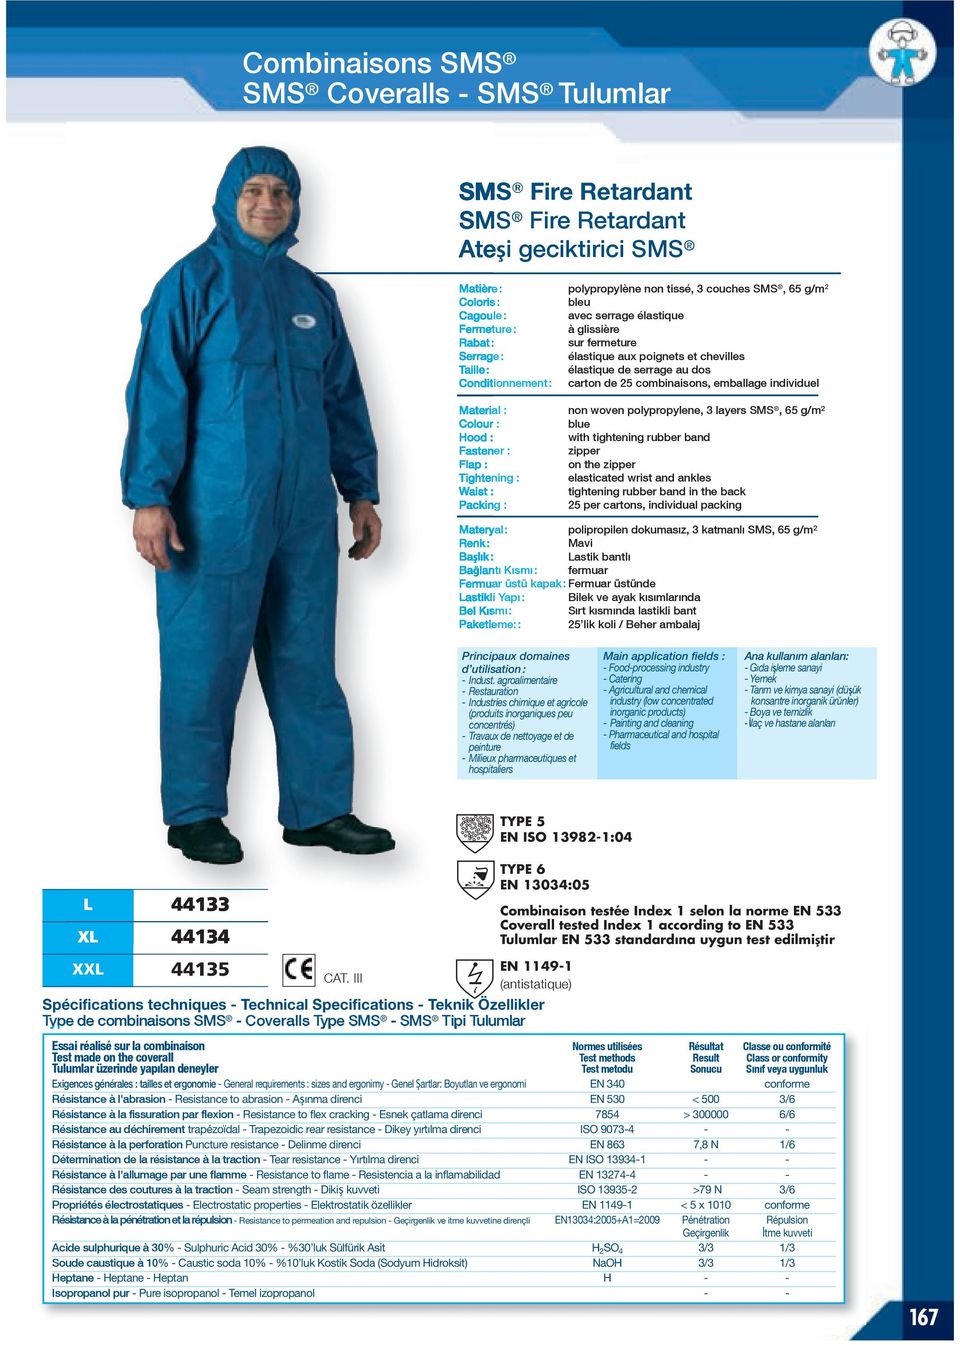 Hood : Fastener : Flap : Tightening : Waist : non woven polypropylene, 3 layers SMS, 65 g/m² blue with tightening rubber band zipper on the zipper elasticated wrist and ankles tightening rubber band